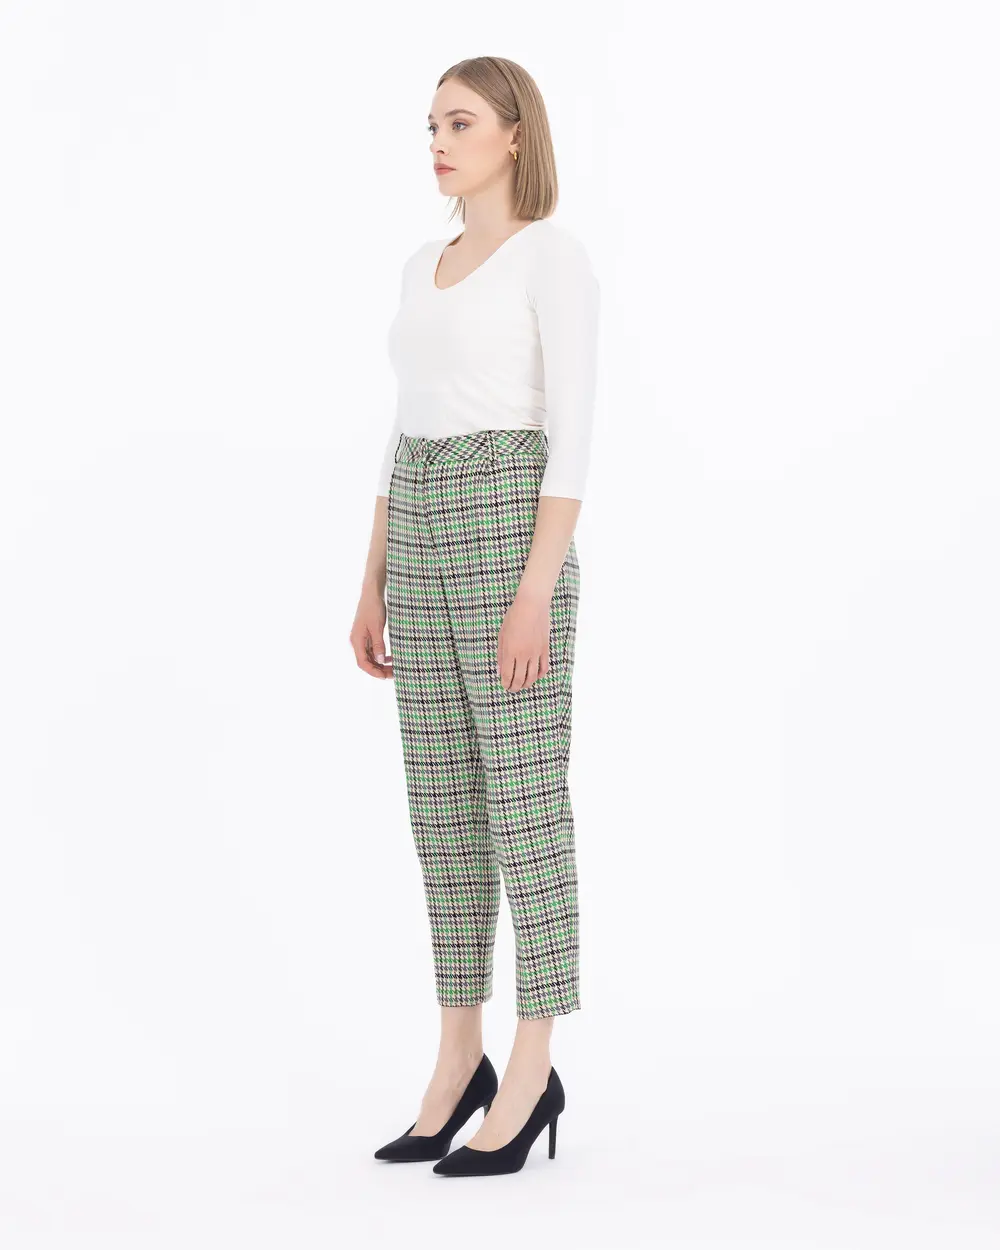 Crowbar Patterned Carrot Cut Trousers